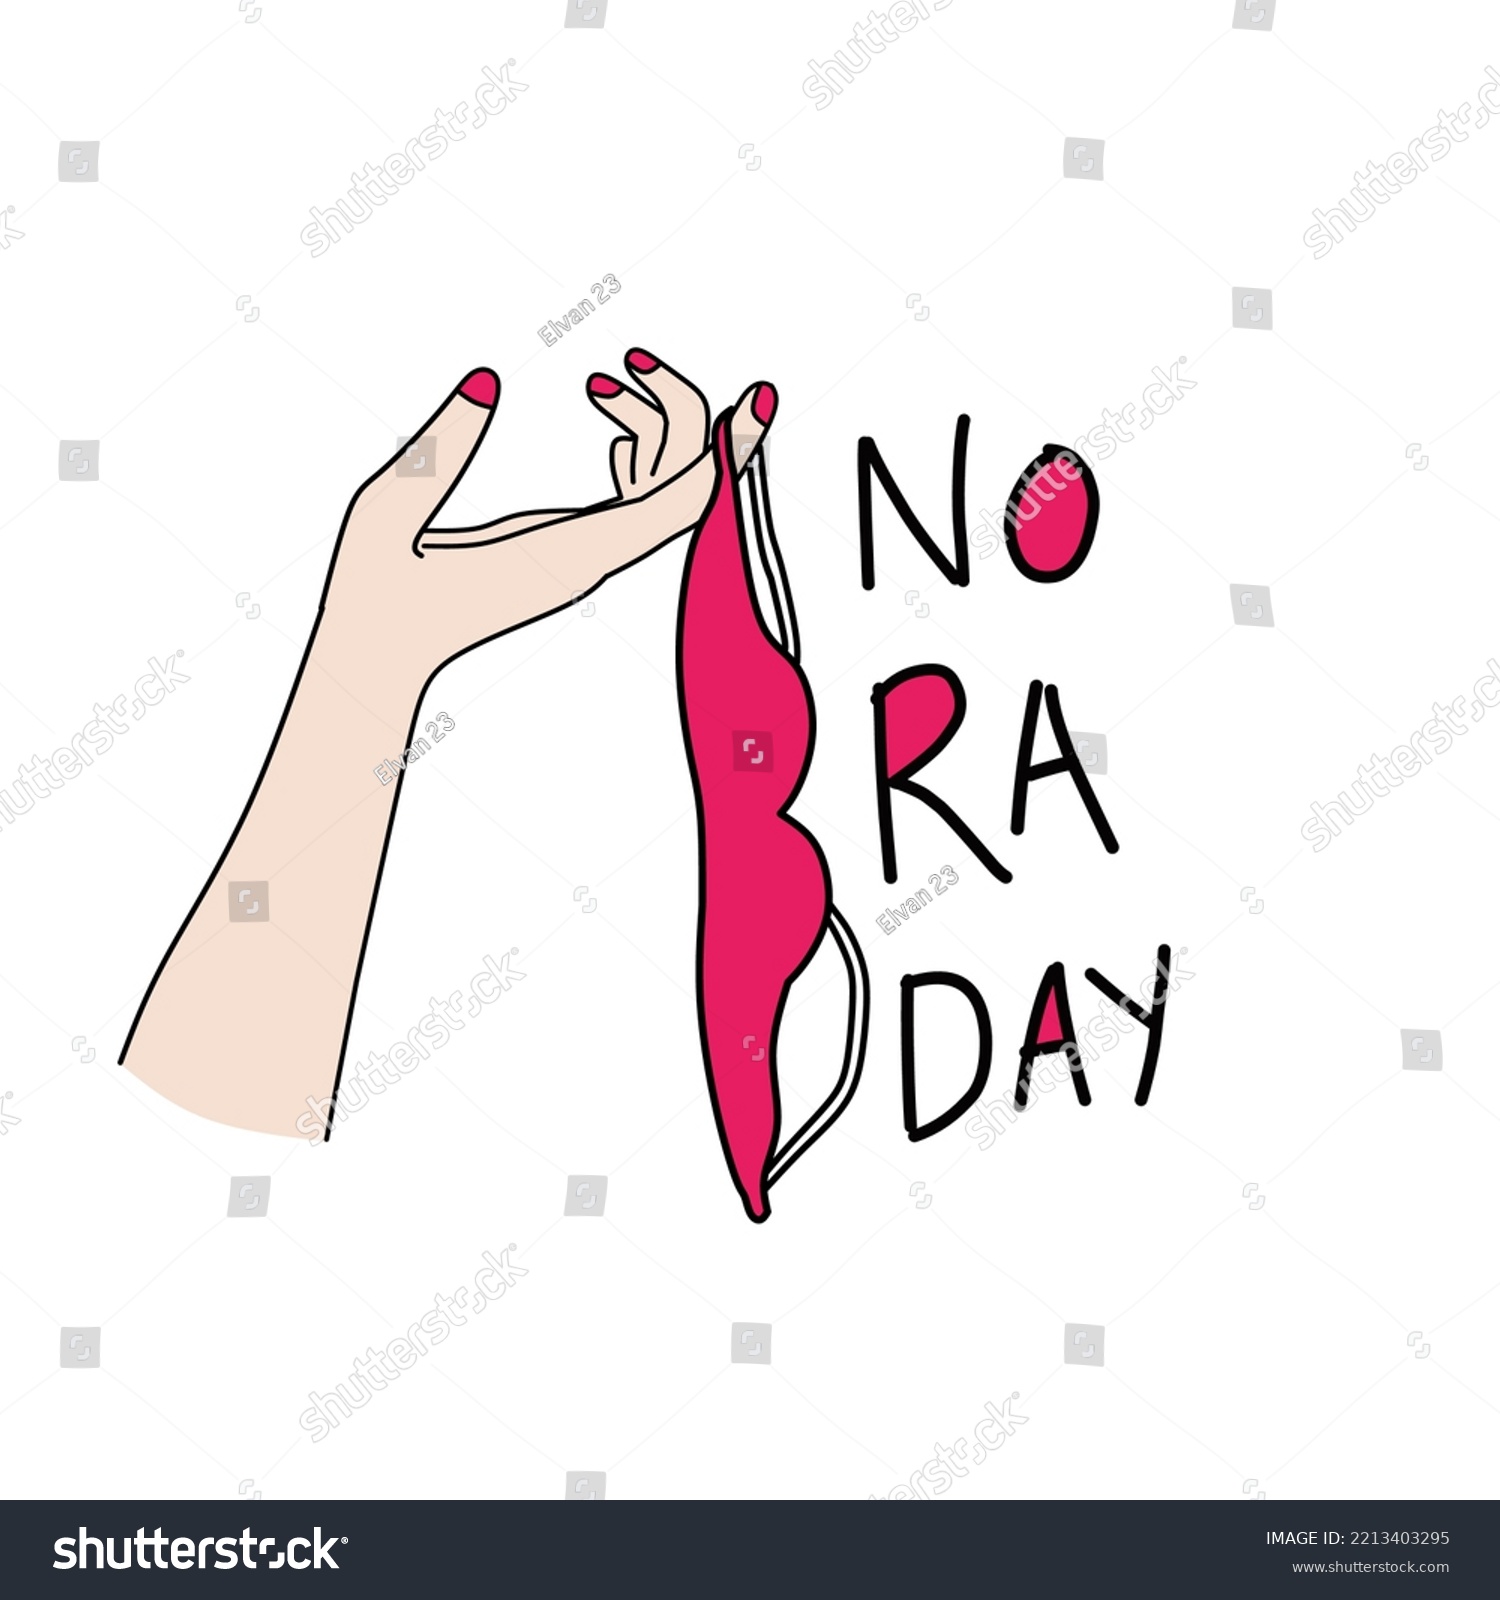 No Bra Day Vector On October Stock Vector Royalty Free 2213403295